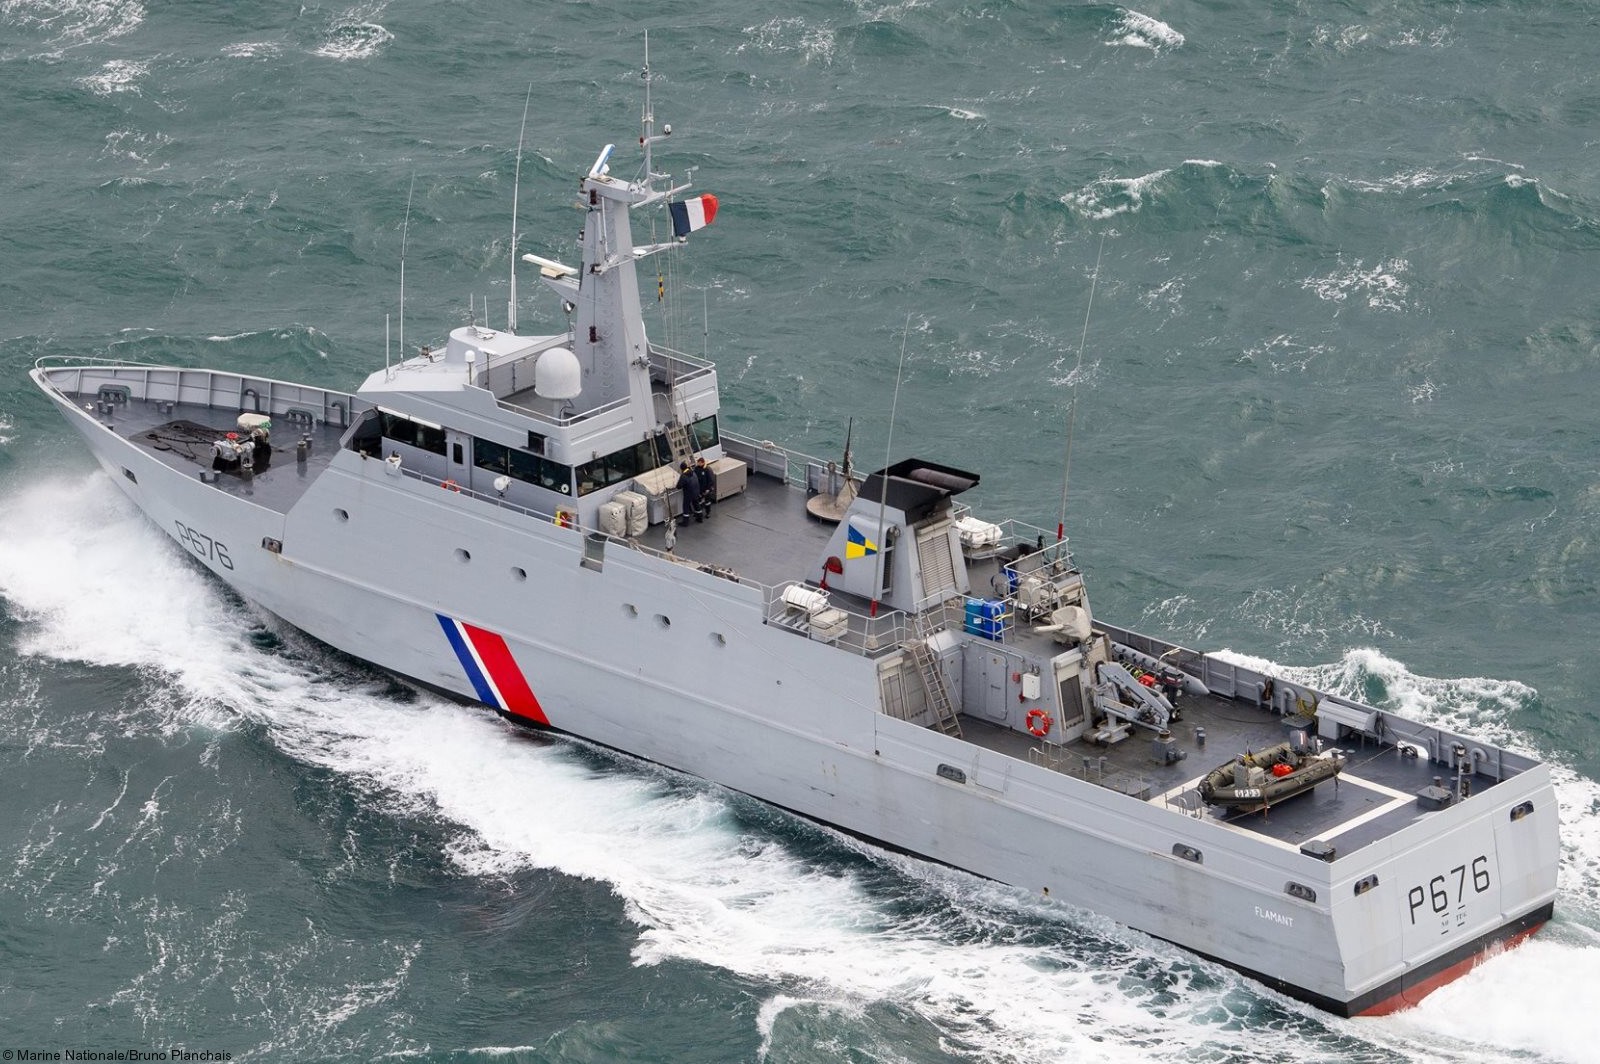 p-676 flamant class offshore patrol vessel opv french navy patrouilleur marine nationale 05